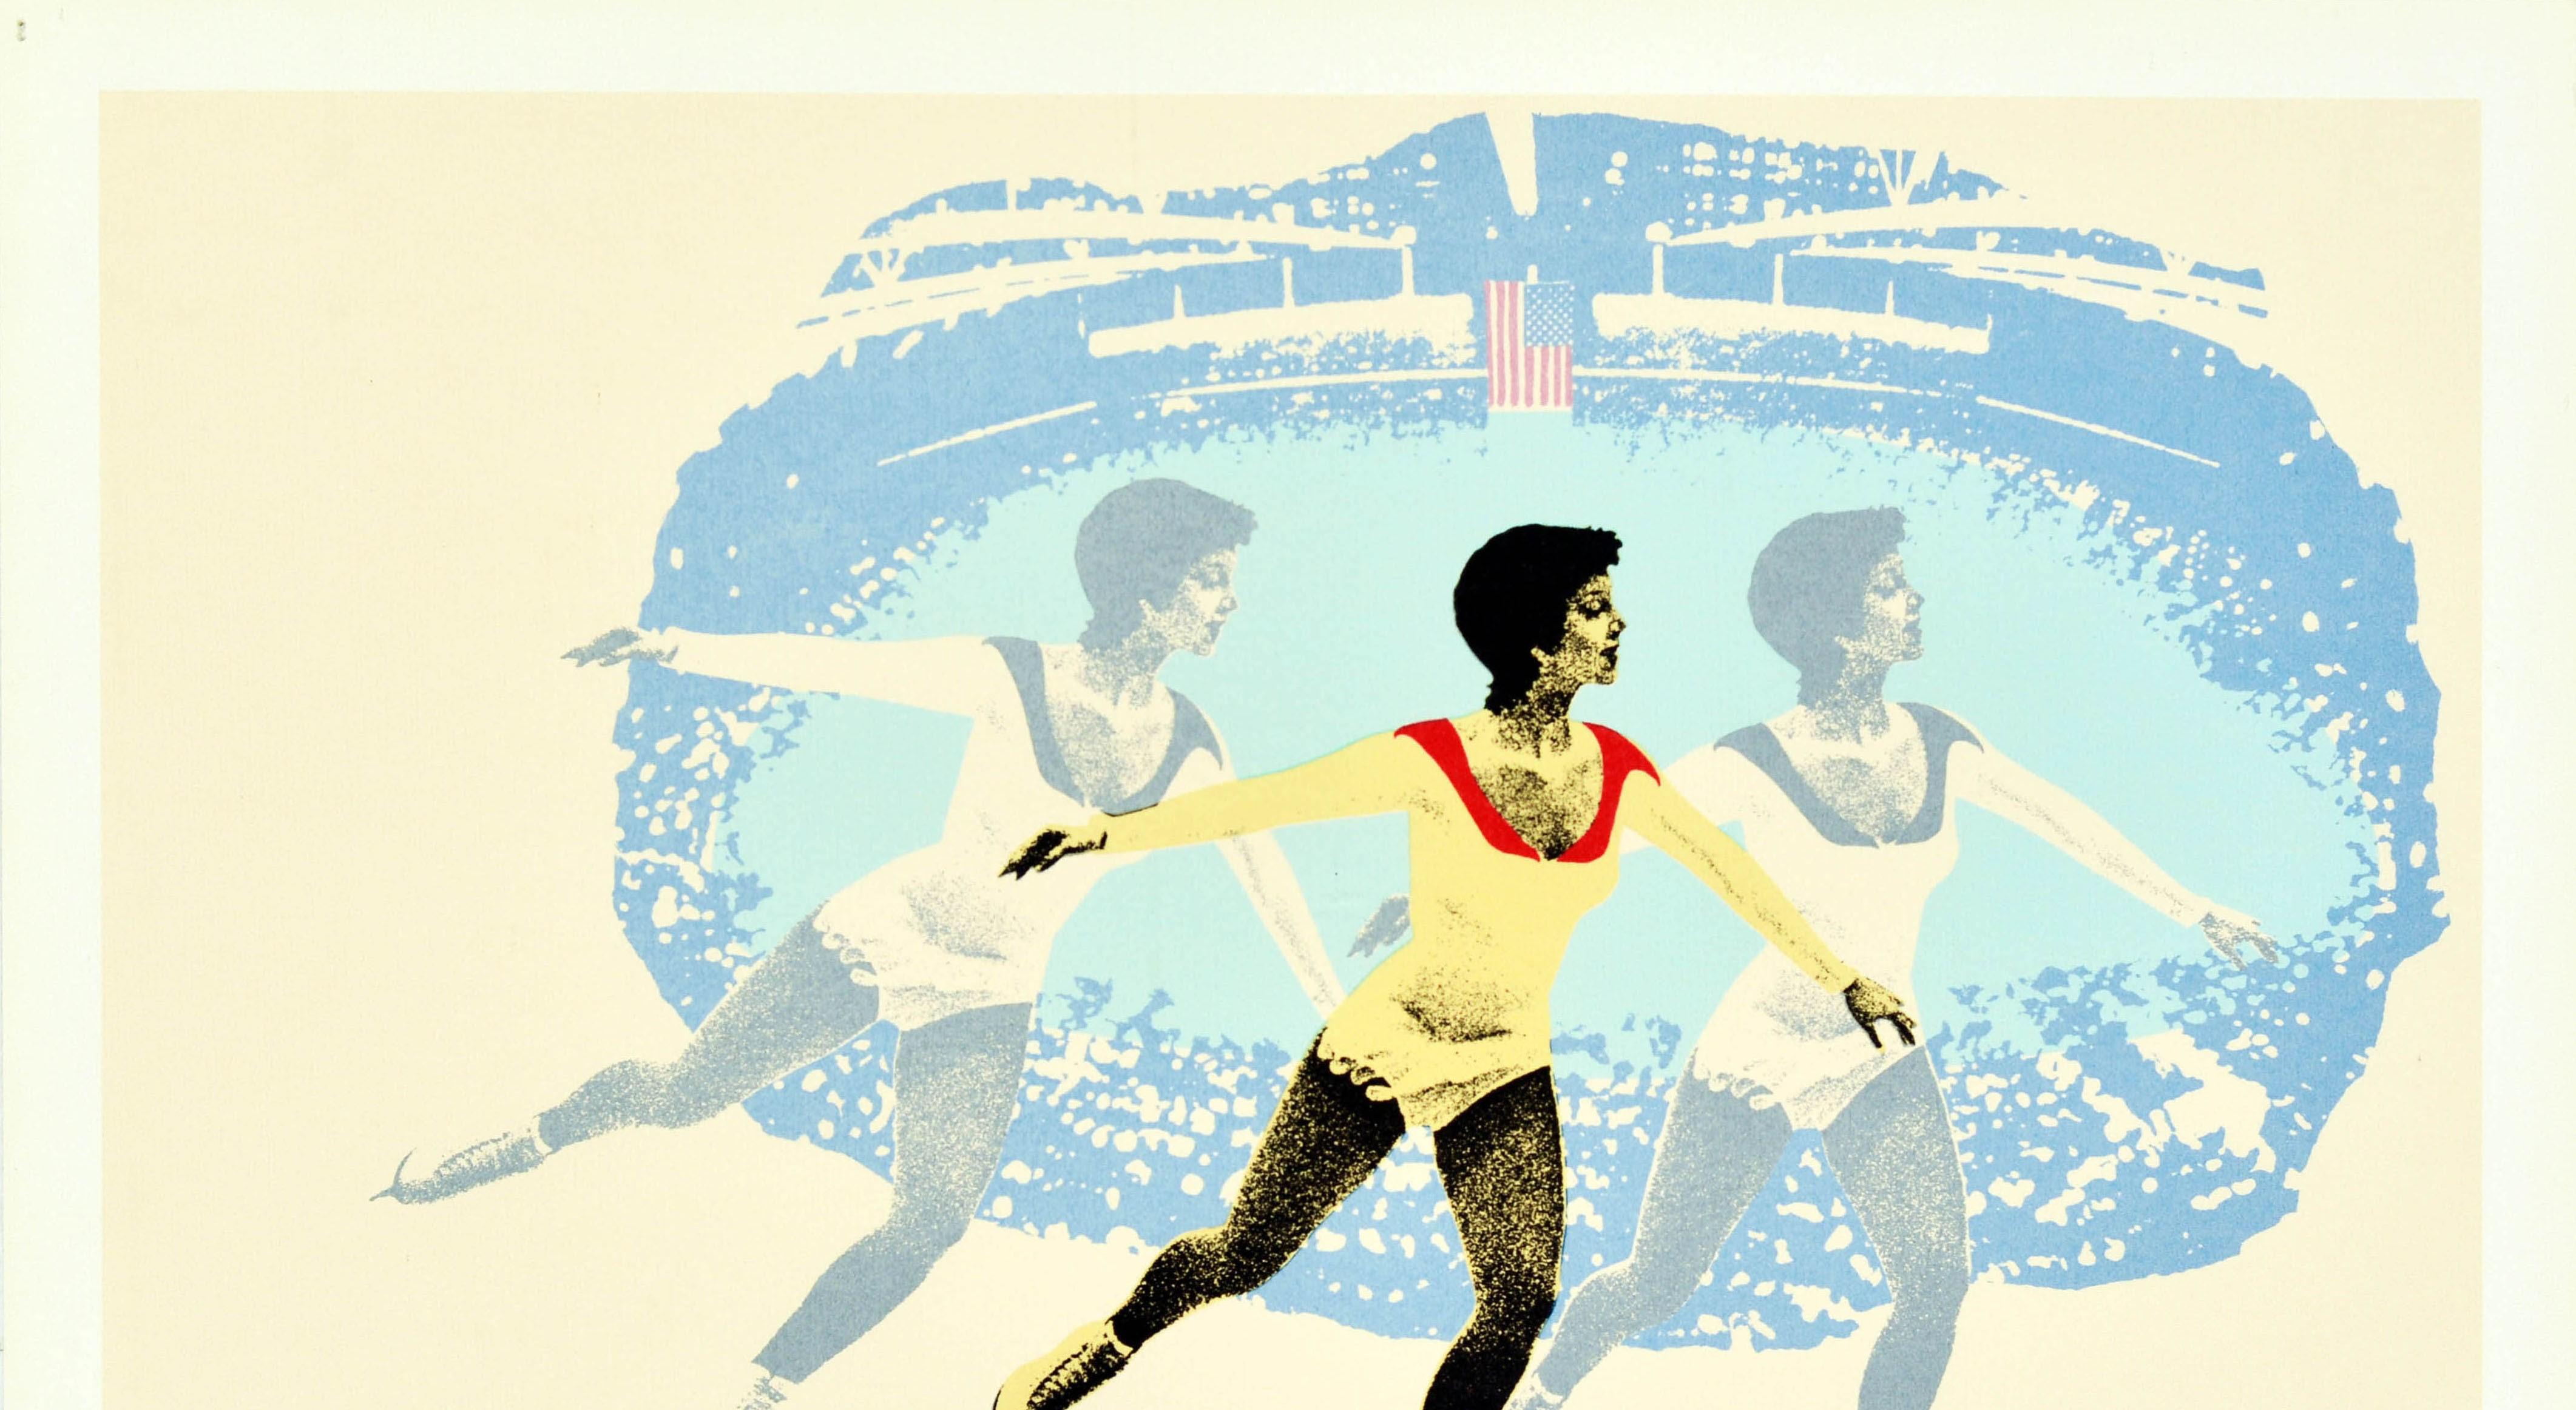 Original vintage sport poster for the XIII Winter Olympic Games Lake Placid 1980 held in New York USA from 13-24 February featuring an illustration of a figure skater skating in front of an ice rink and the American flag with the text below. This